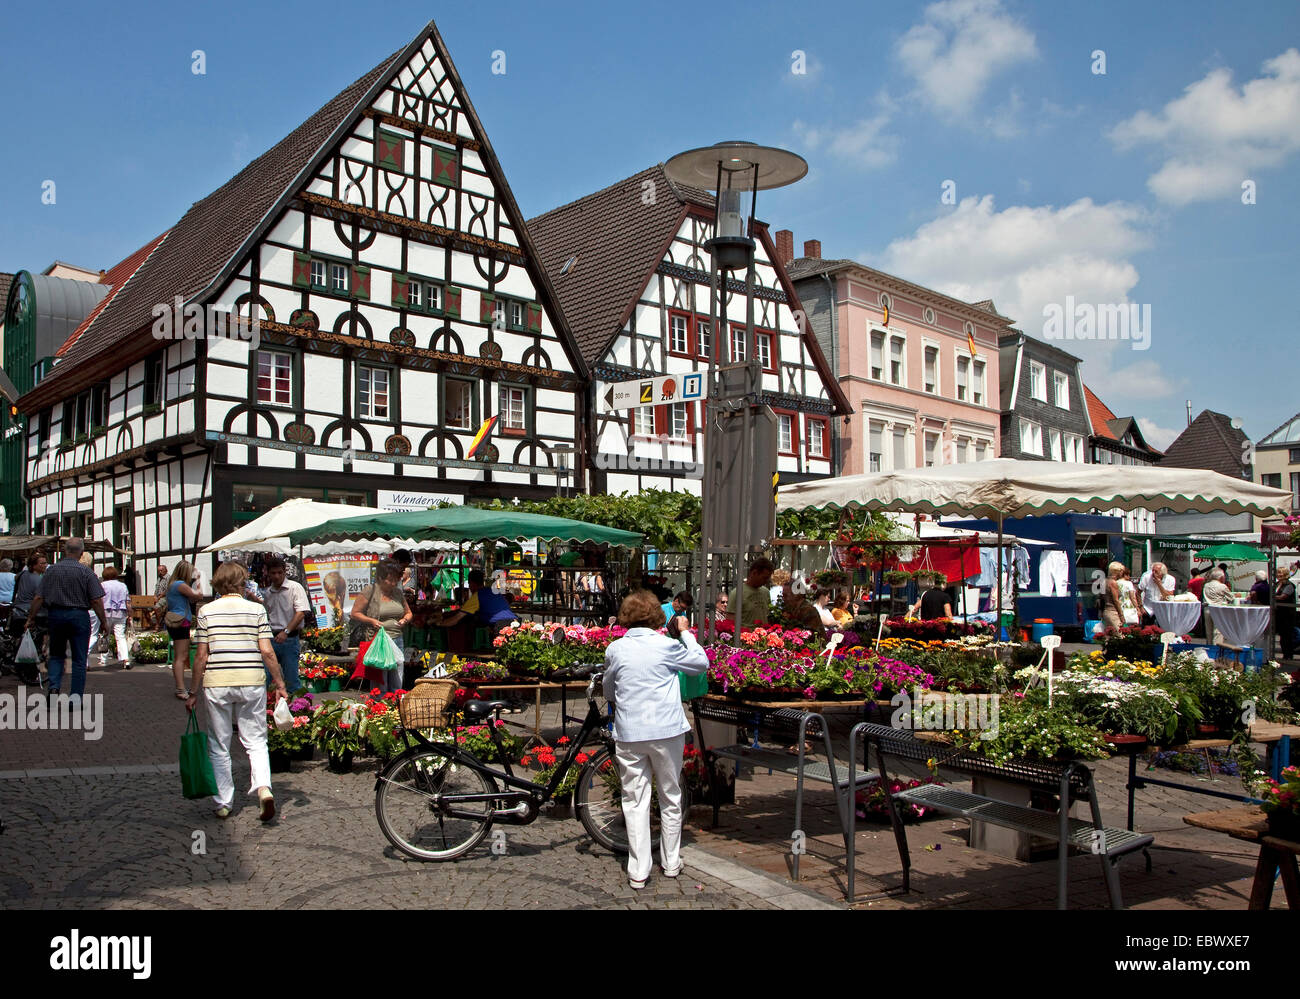 people on the weekly market in the city of Unna, Germany, North Rhine-Westphalia, Ruhr Area, Unna Stock Photo